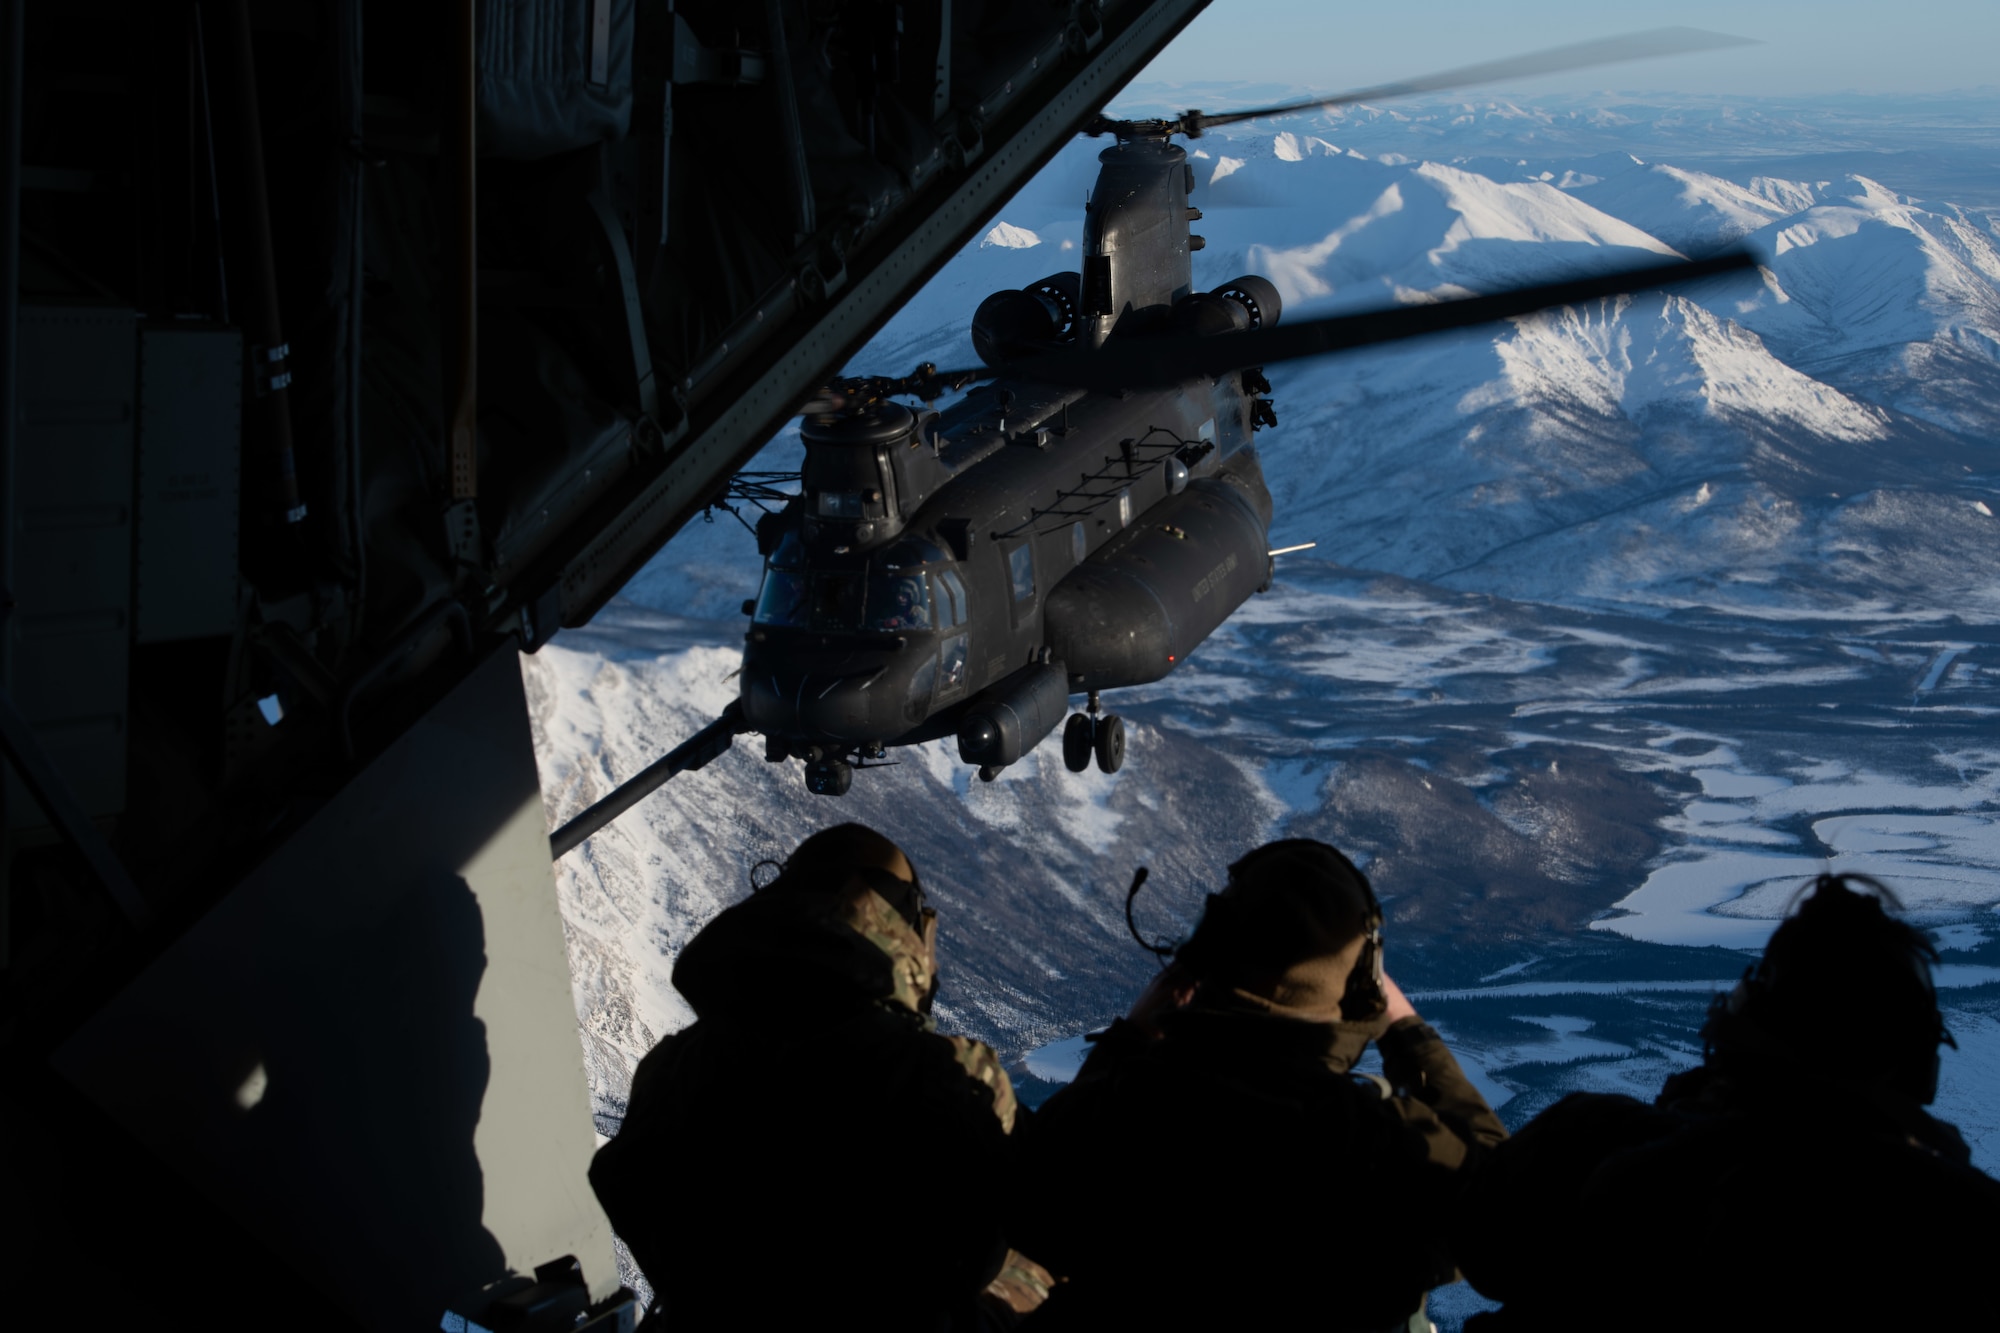 U.S. service members from the 160th Special Operations Aviation Regiment (Airborne), 6th Special Operations Squadron and 109th Airlift Wing watch a MH-47G Special Operations Aircraft assigned to the 160th Special Operations Aviation Regiment (Airborne), refuel mid-air during Arctic Edge 24(AE24) over the Alaskan wilderness, March 2, 2024. During AE24, more than 400 joint and allied Special Operators trained in extreme cold conditions to sharpen SOF readiness across unique specialties like long range fires and movements, special reconnaissance, rapid resupply, personnel recovery, and medical care in the austere Arctic environment. (U.S. Air Force photo by Senior Airman Drew Cyburt)